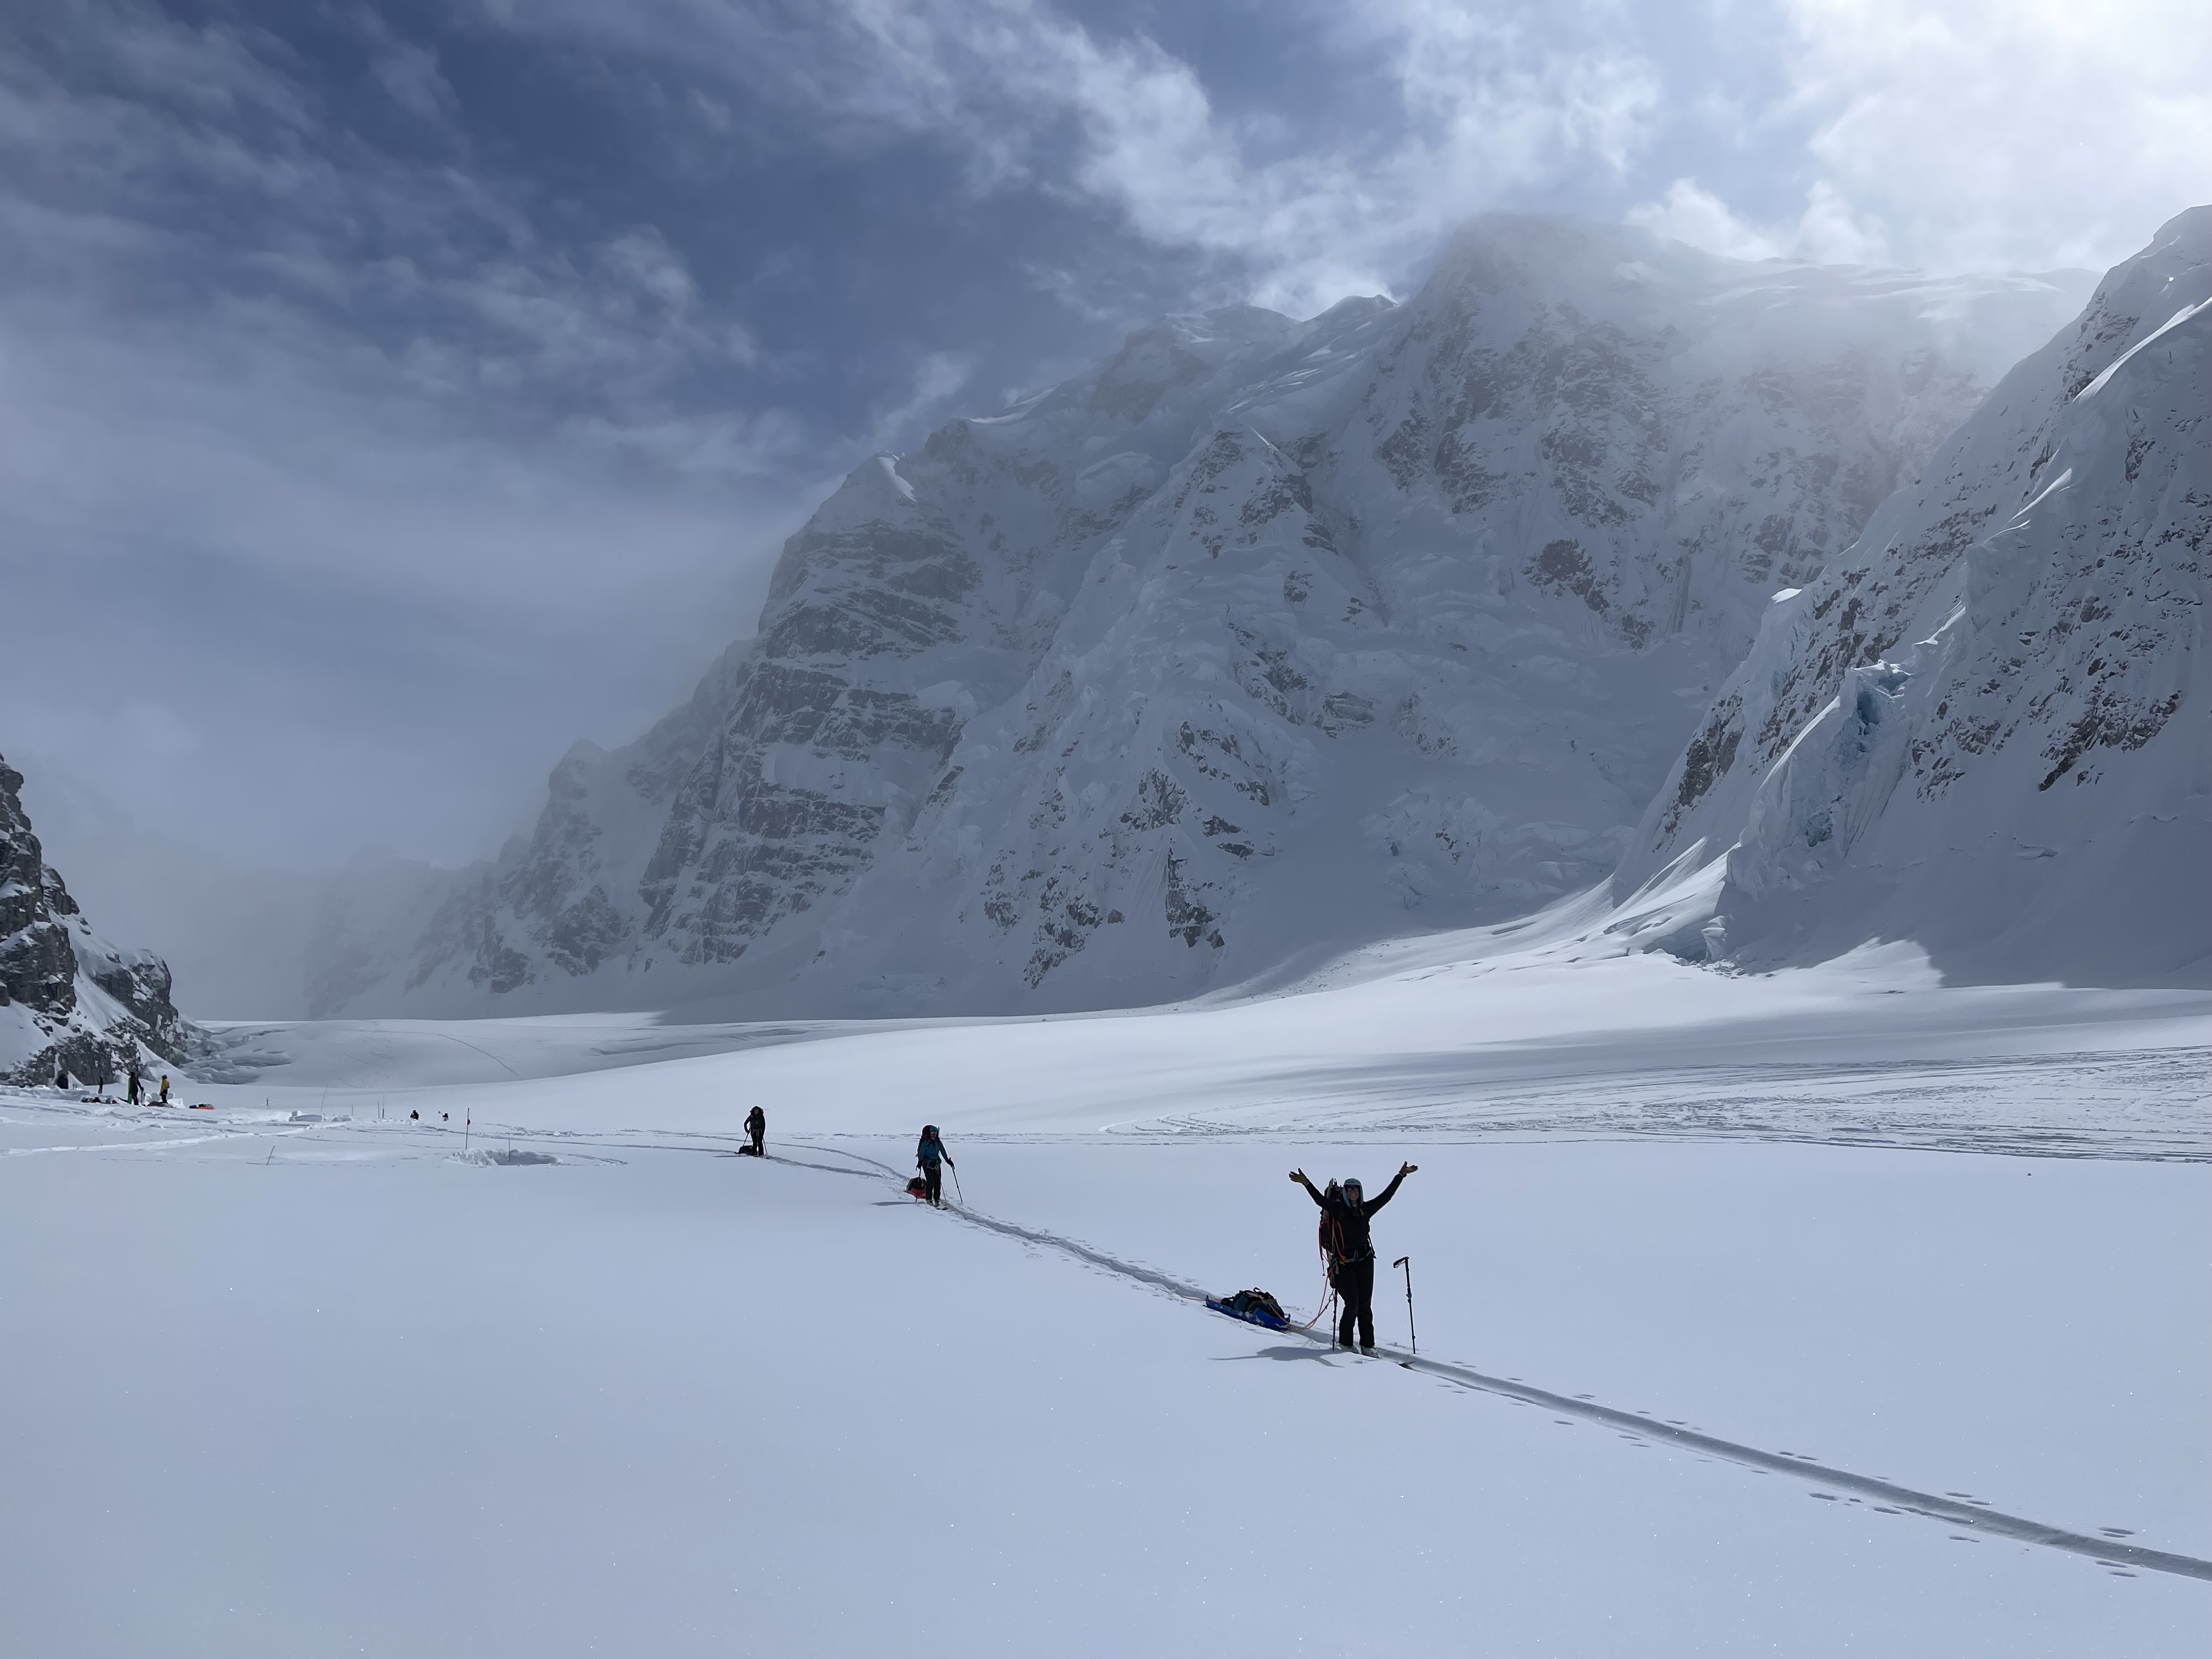 A rope team skis along a flat glacier surrounded by steep mountain peaks